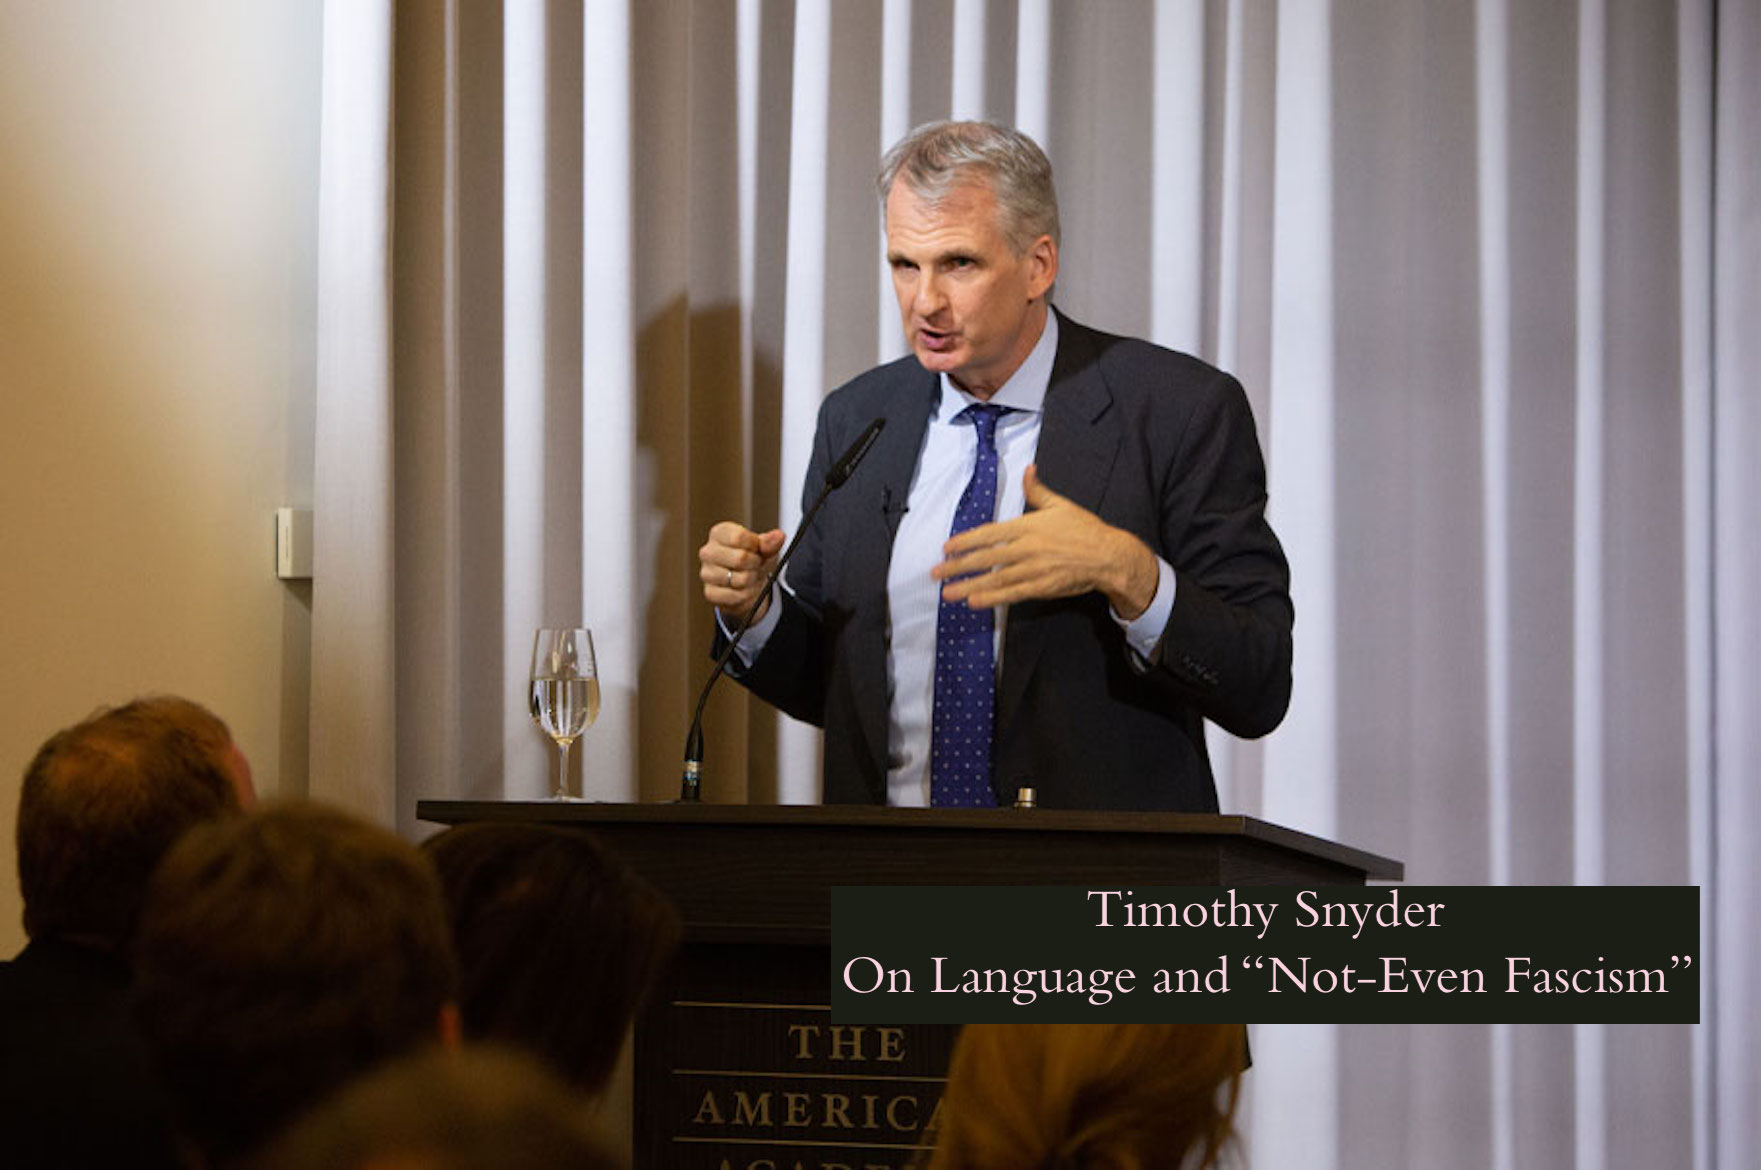 Timothy Snyder – On Language and “Not Even Fascism”